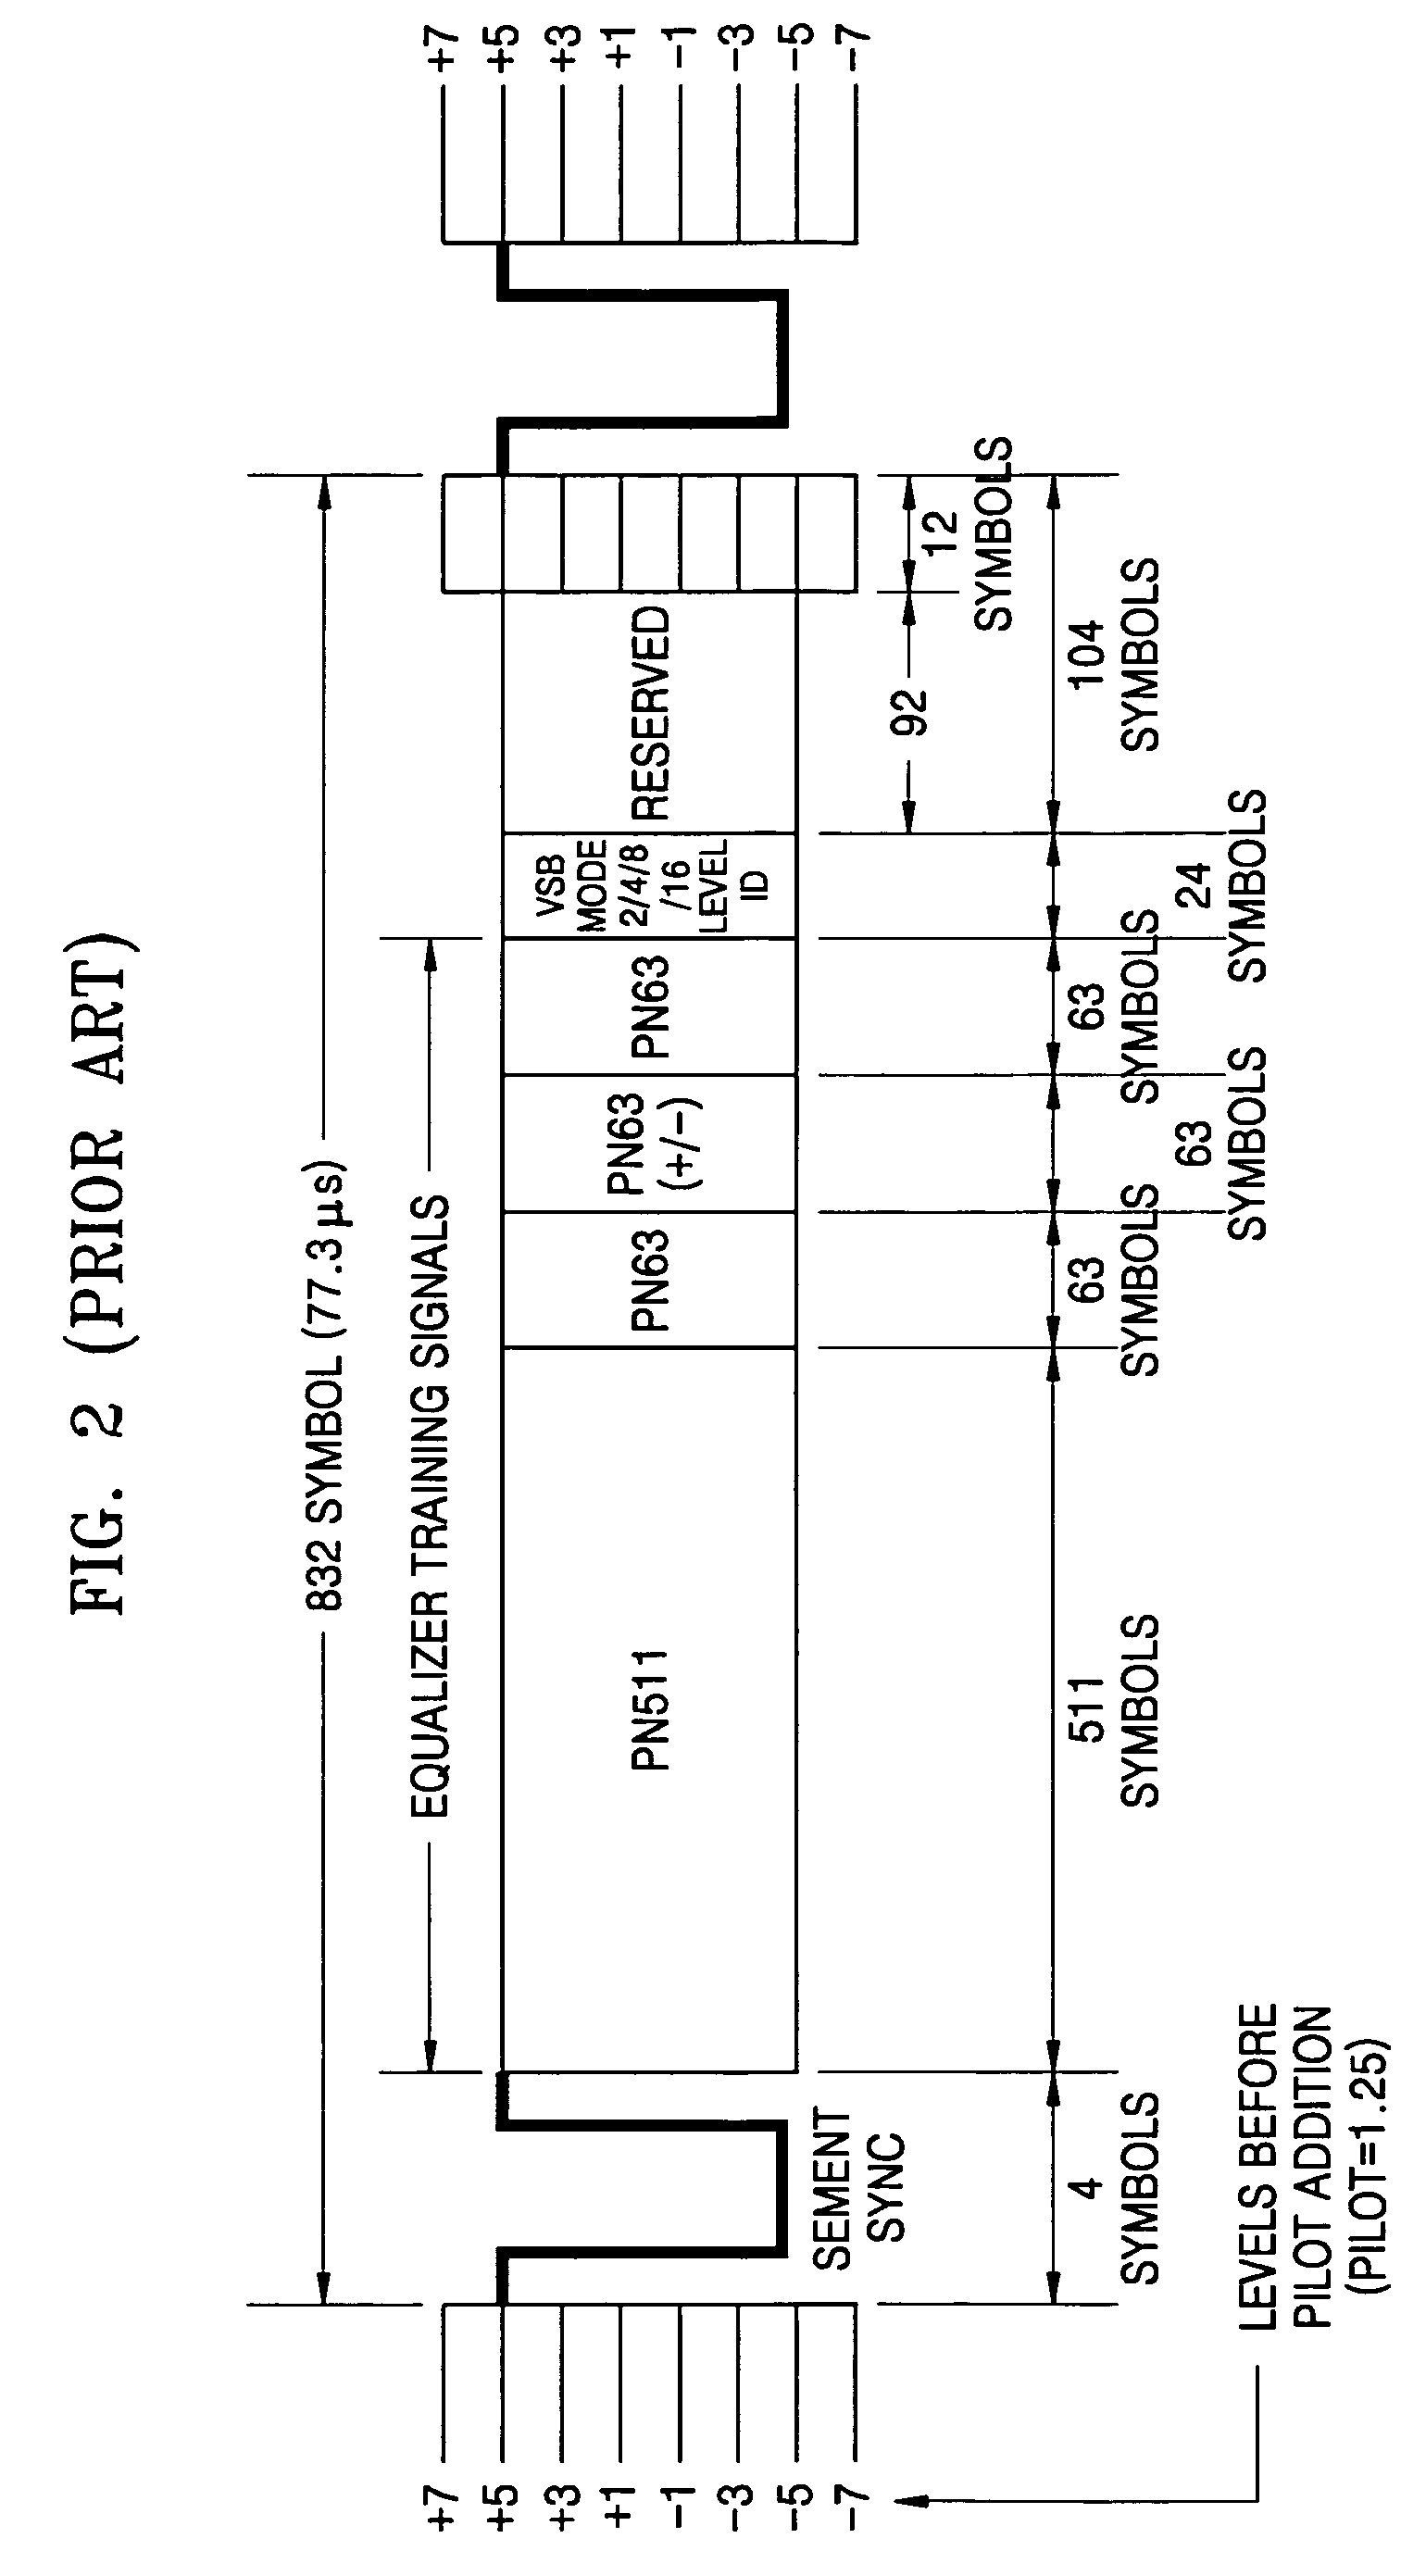 Synchronization signal detection circuit and method of digital television (DTV) receiver